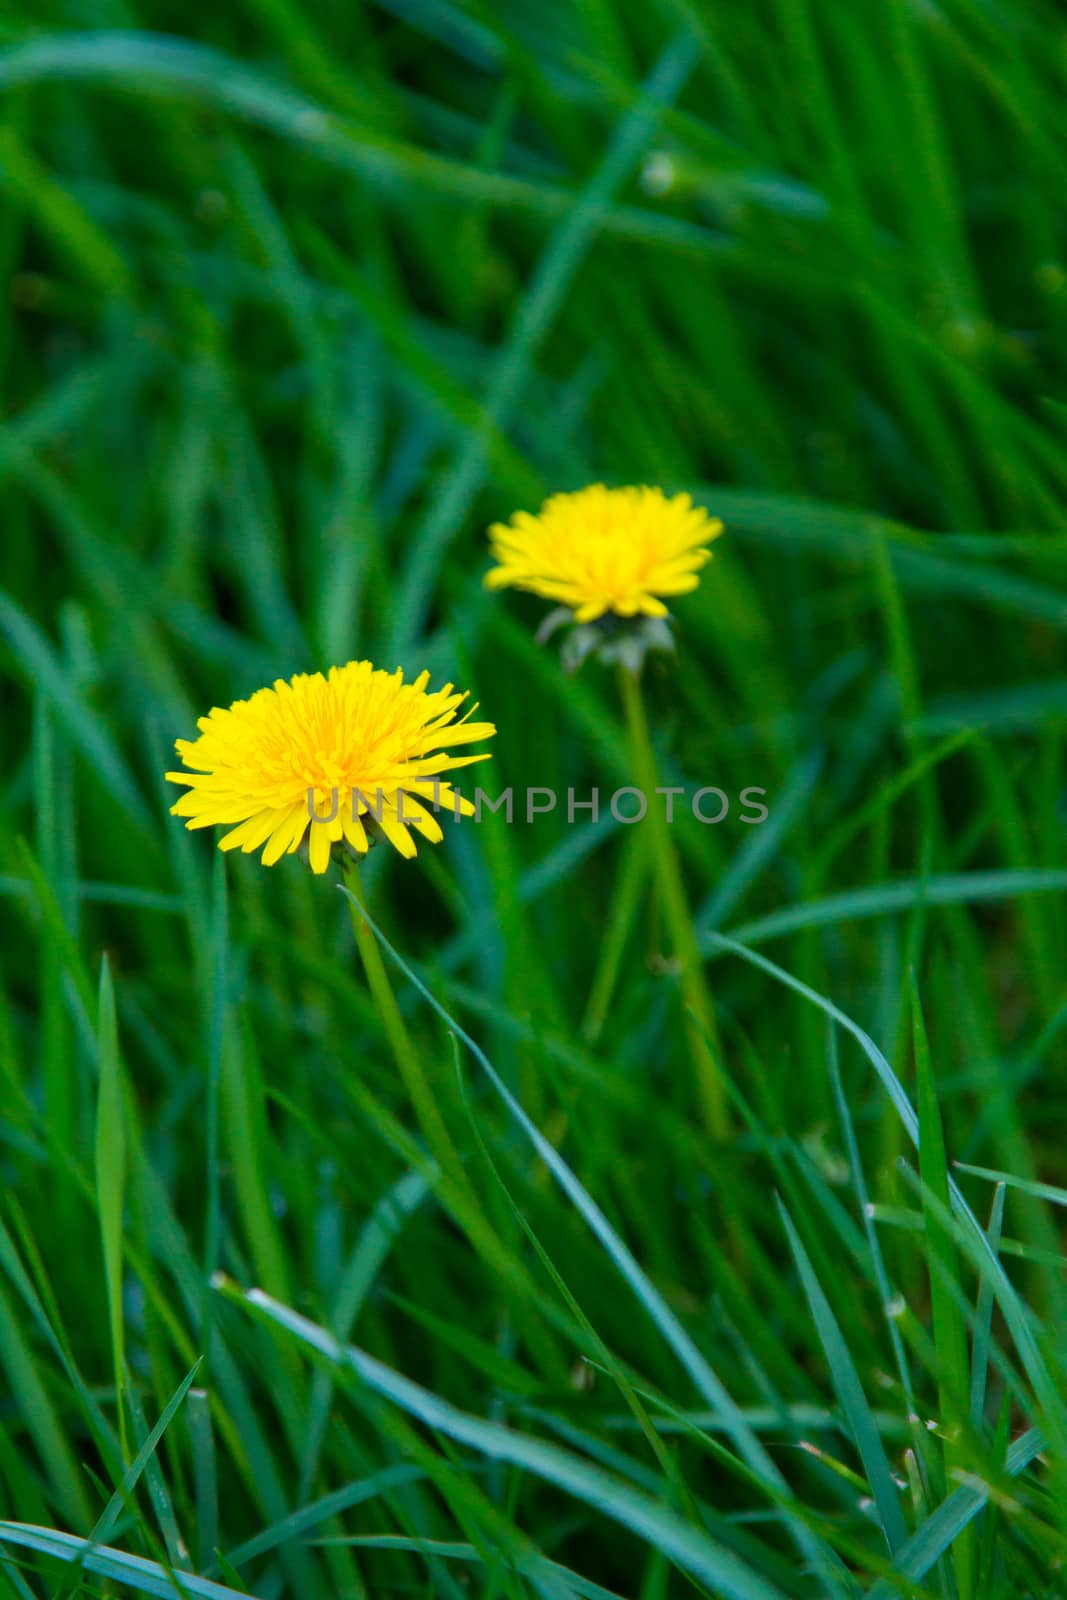 Yellow flowers stand out in this tall green grass from the stalk of a dandelion while it is still flowered.